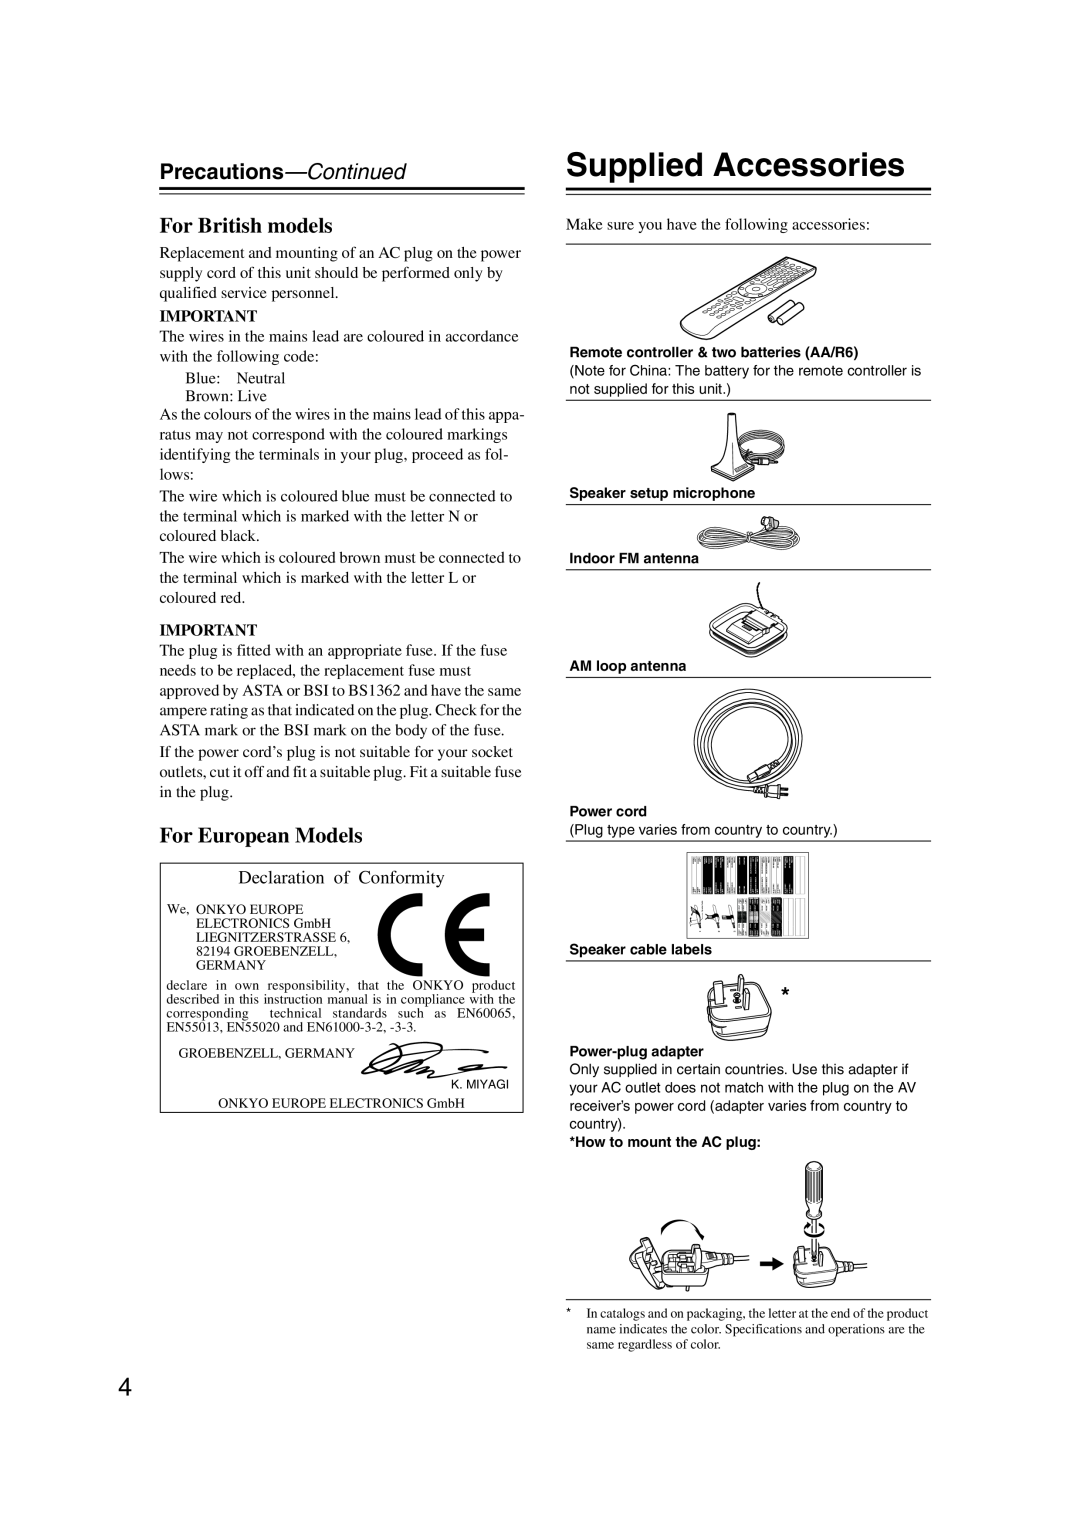 Onkyo TX-NR1007 instruction manual Supplied Accessories, Precautions—Continued, For British models, For European Models 